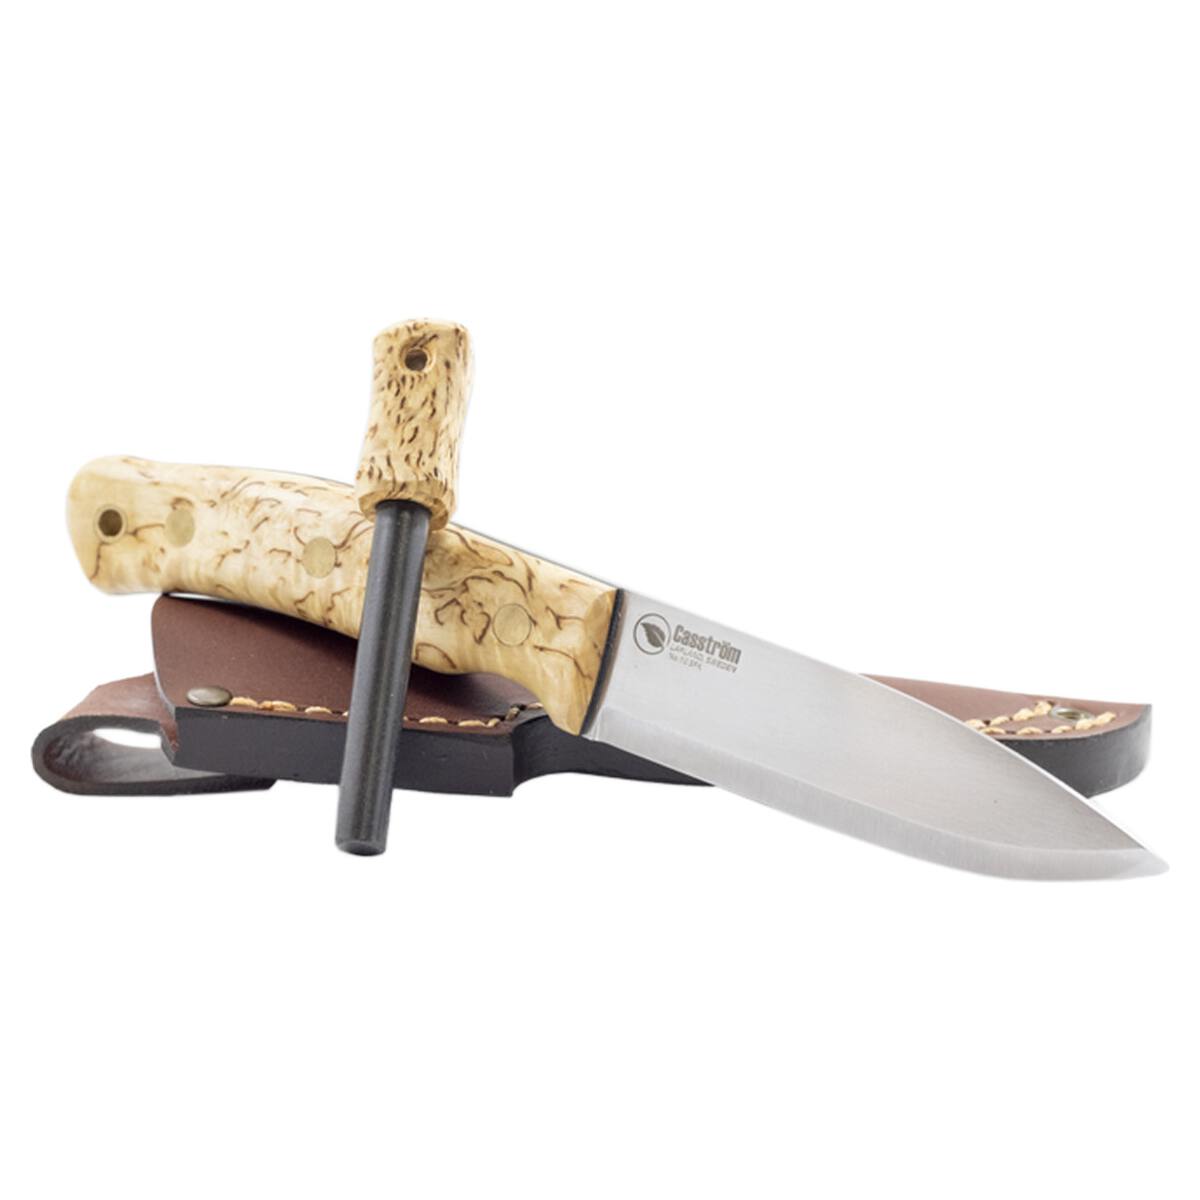 Casstrom No.10 Swedish Forest Knife with Firesteel Combo